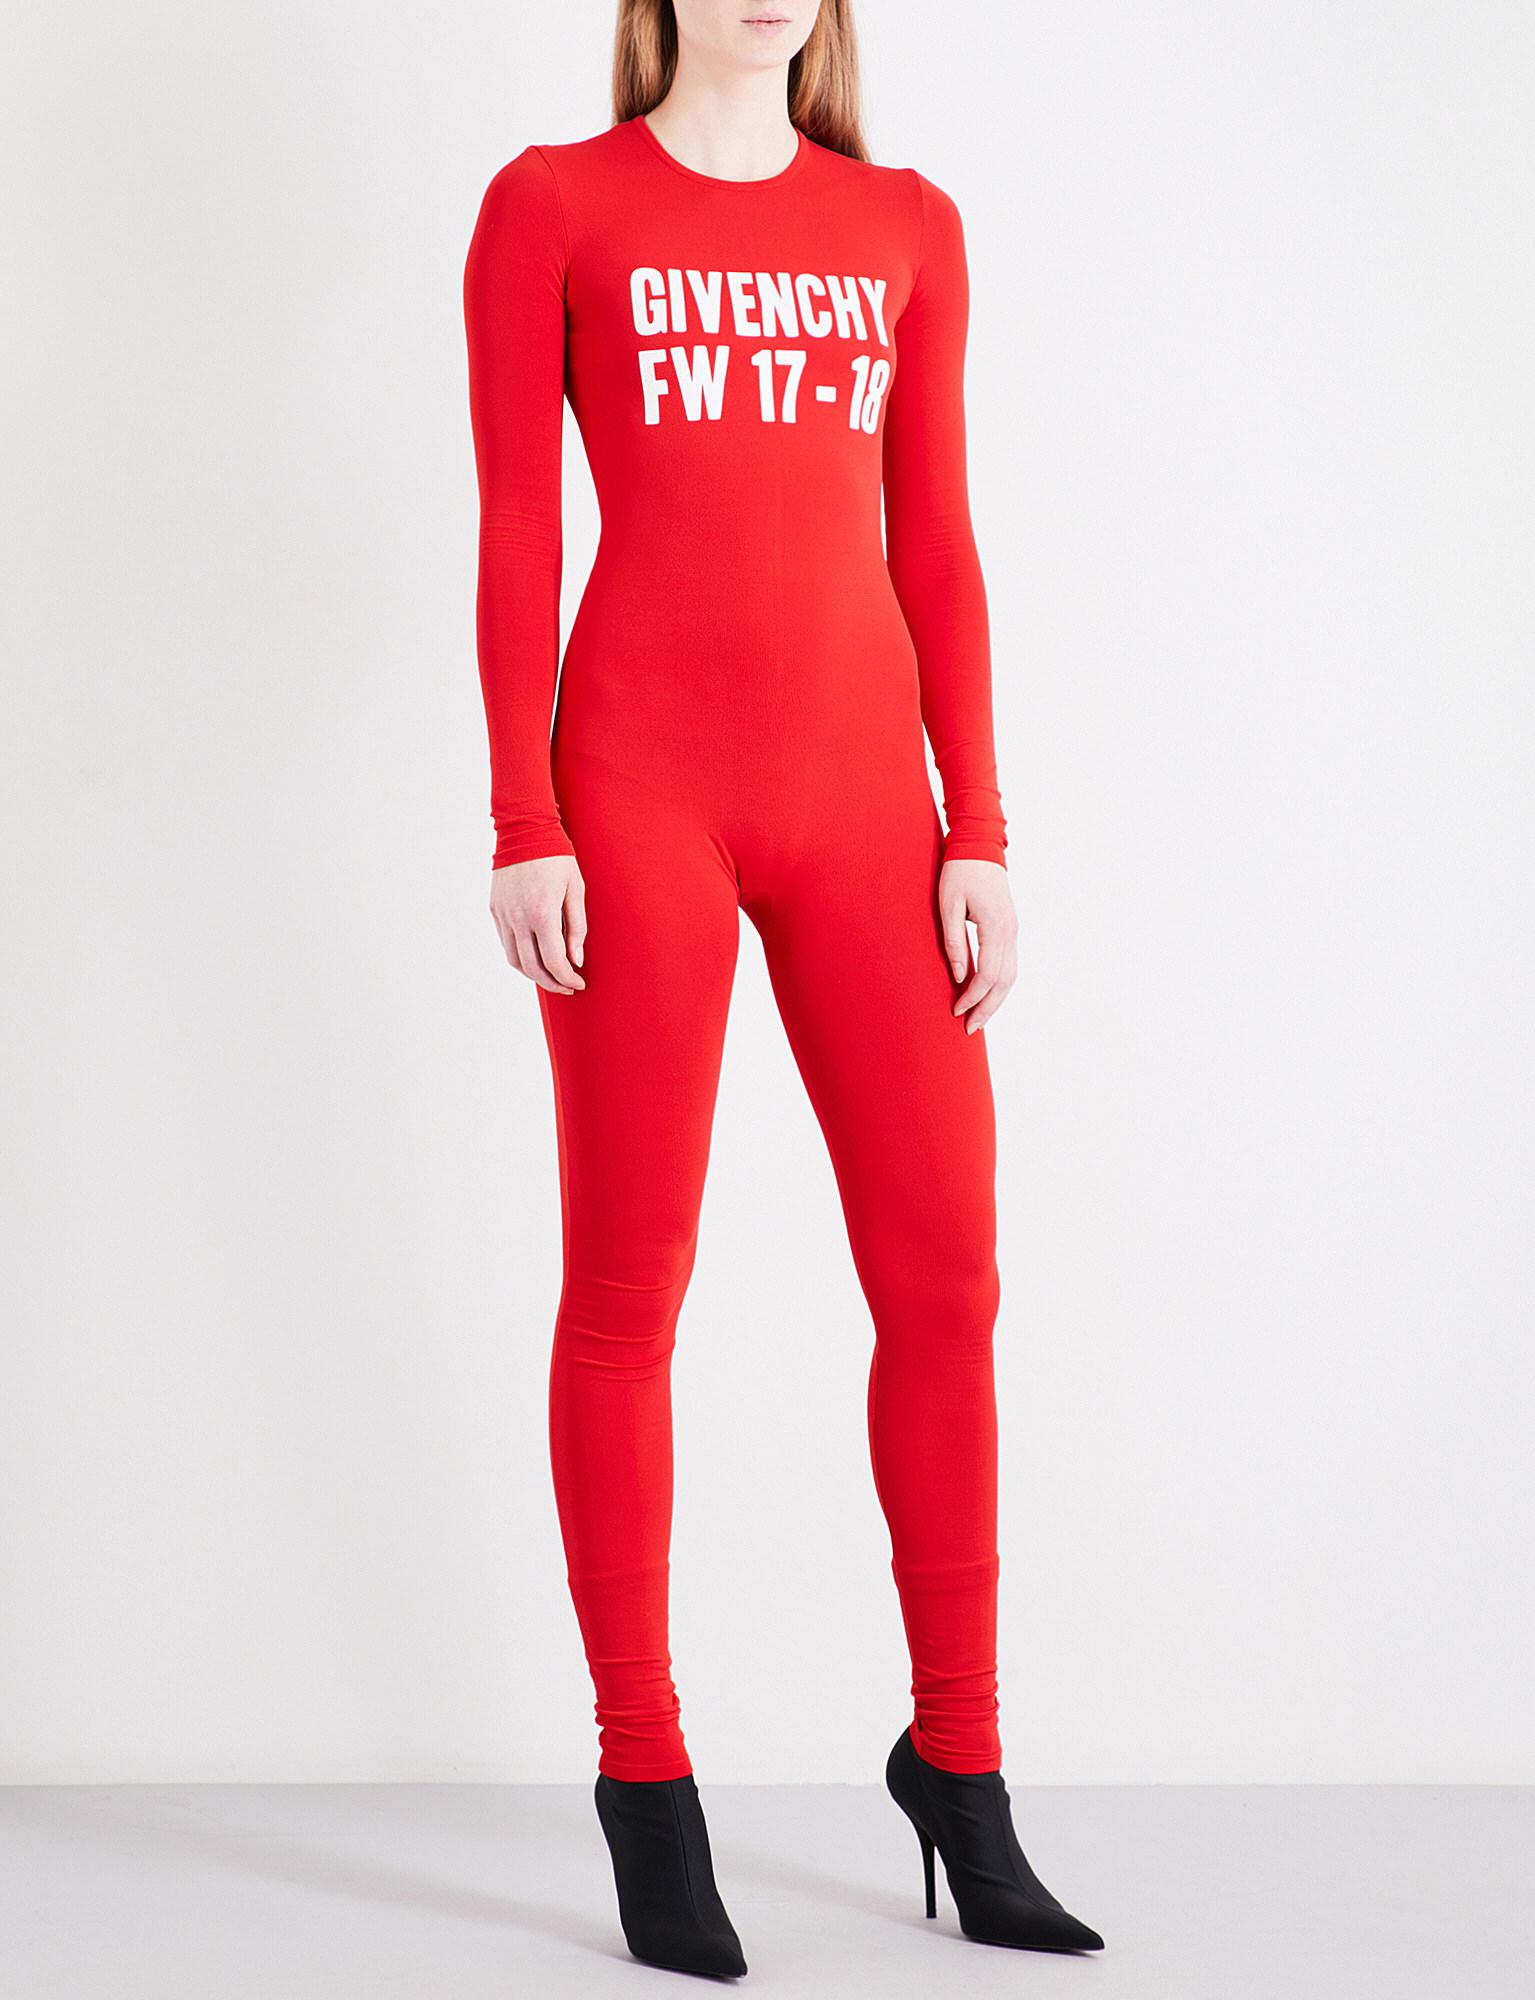 Total 39+ imagen red givenchy jumpsuit